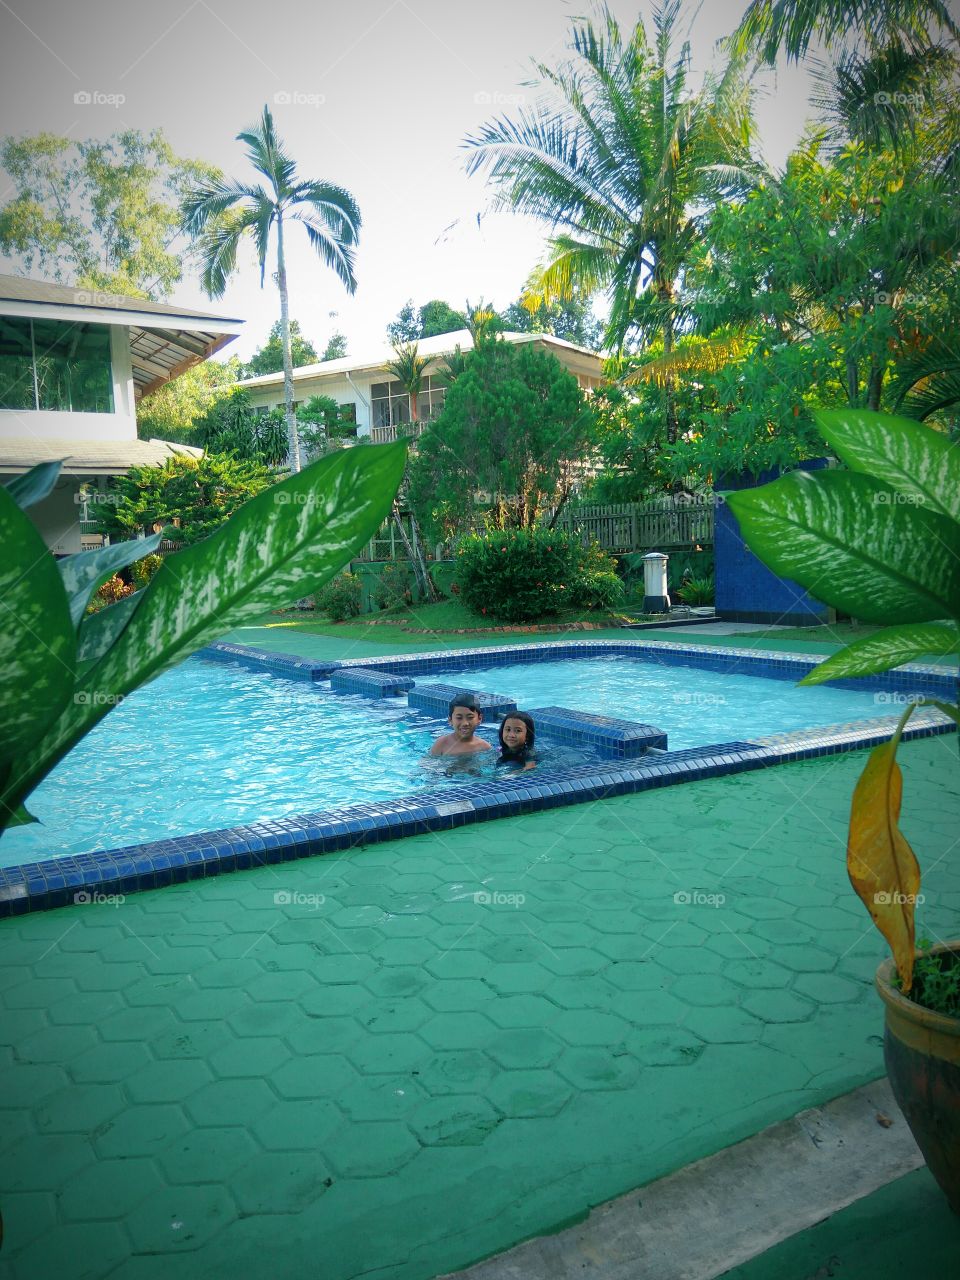 swimming pool in the green area and kids like to play there